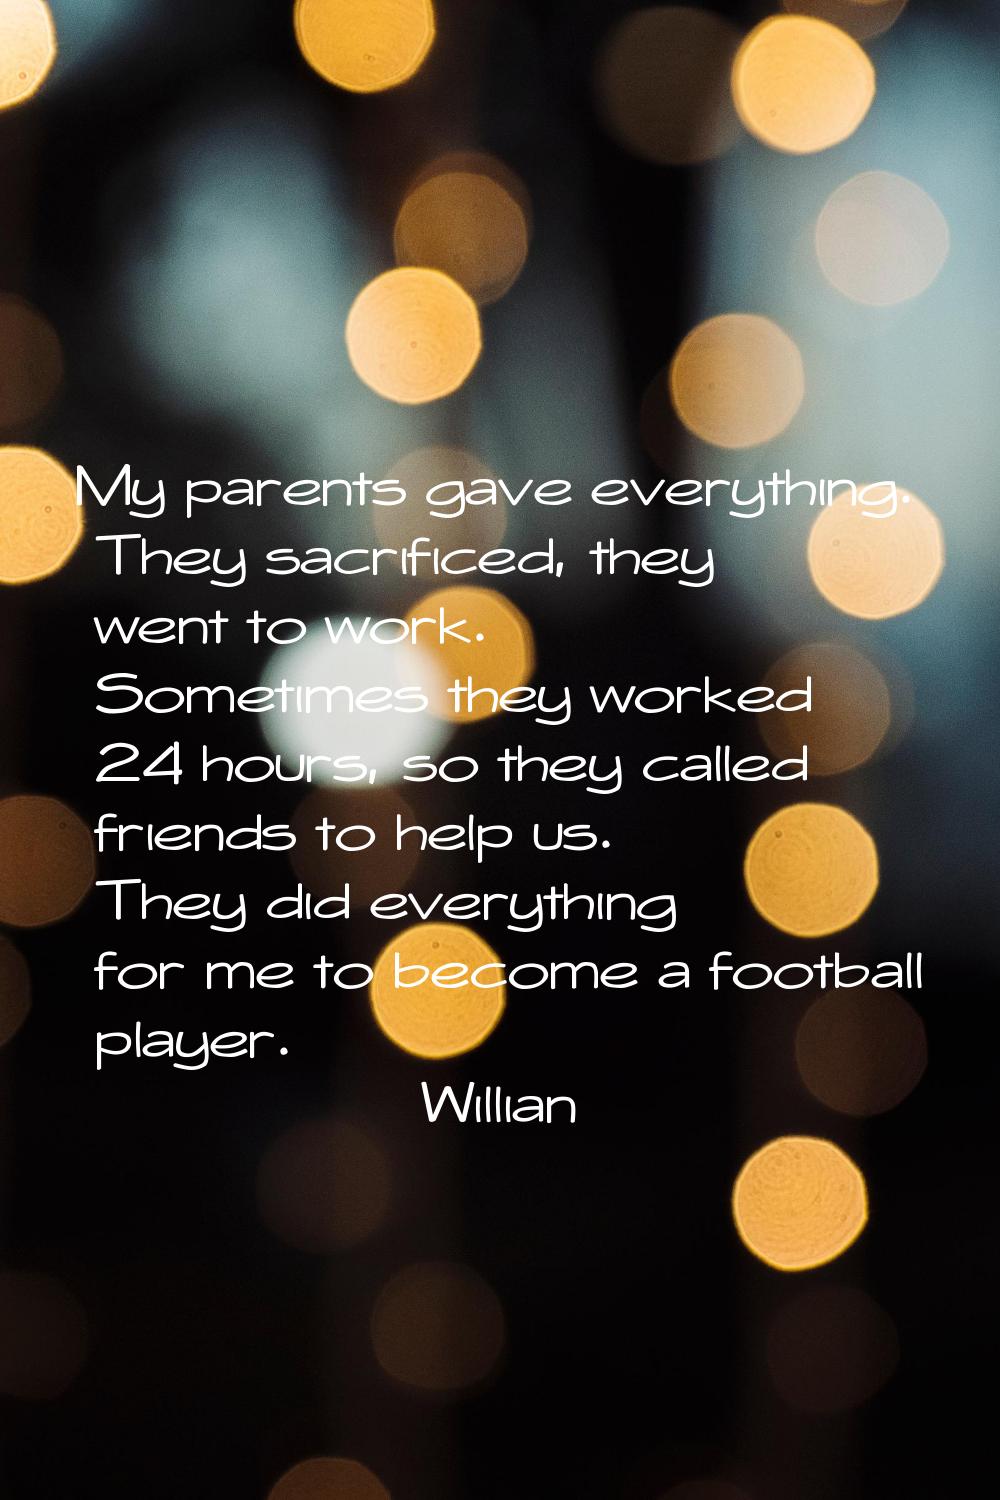 My parents gave everything. They sacrificed, they went to work. Sometimes they worked 24 hours, so 